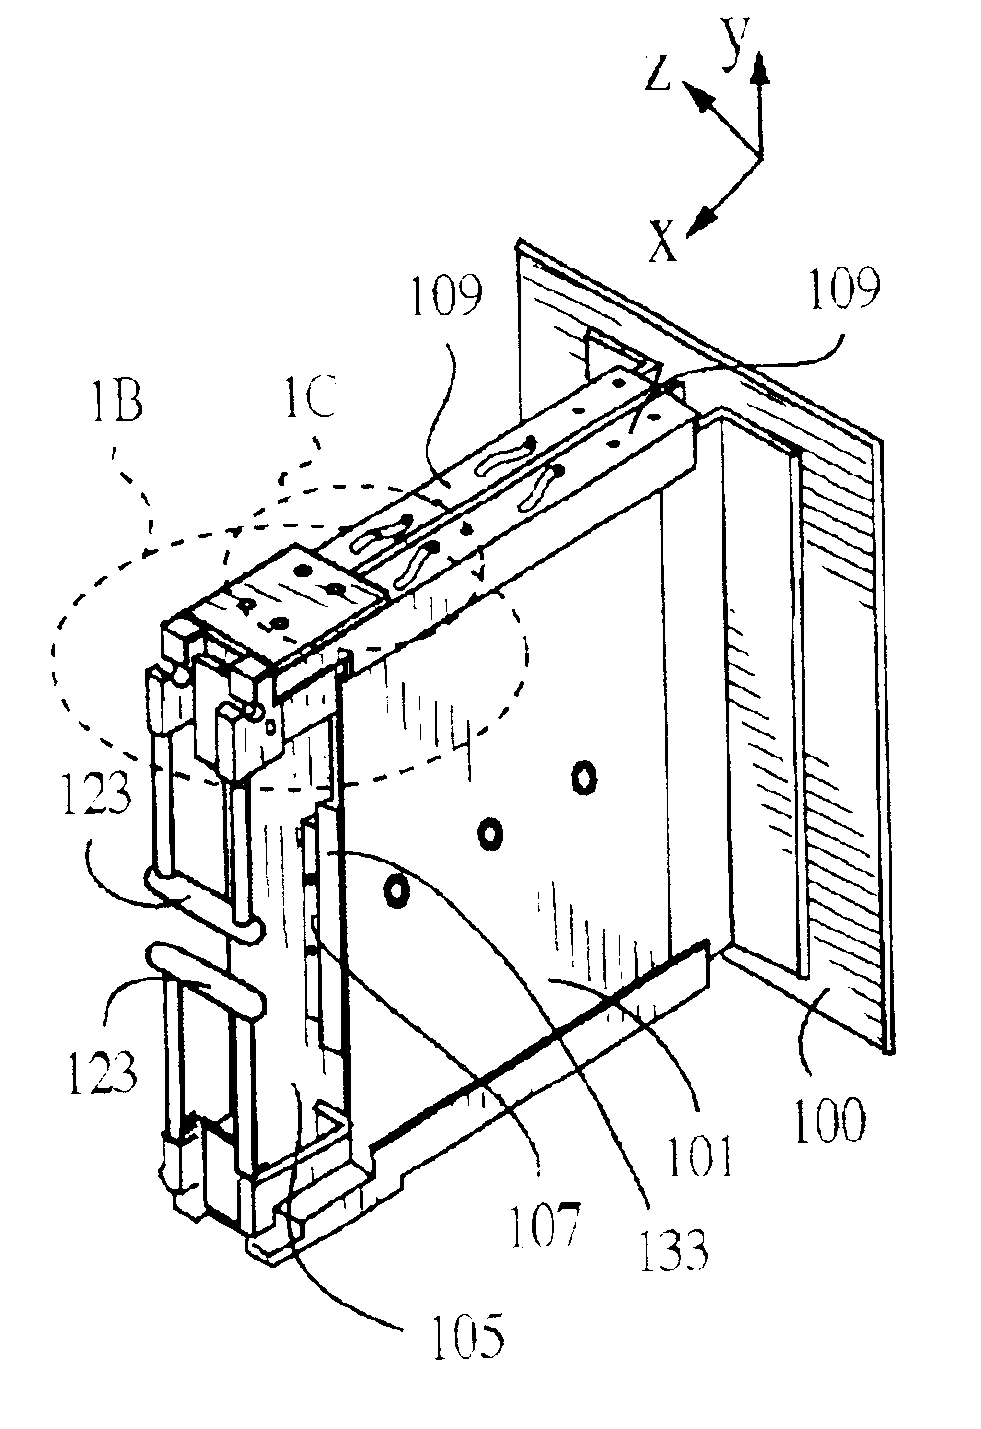 Thermal connector for cooling electronics